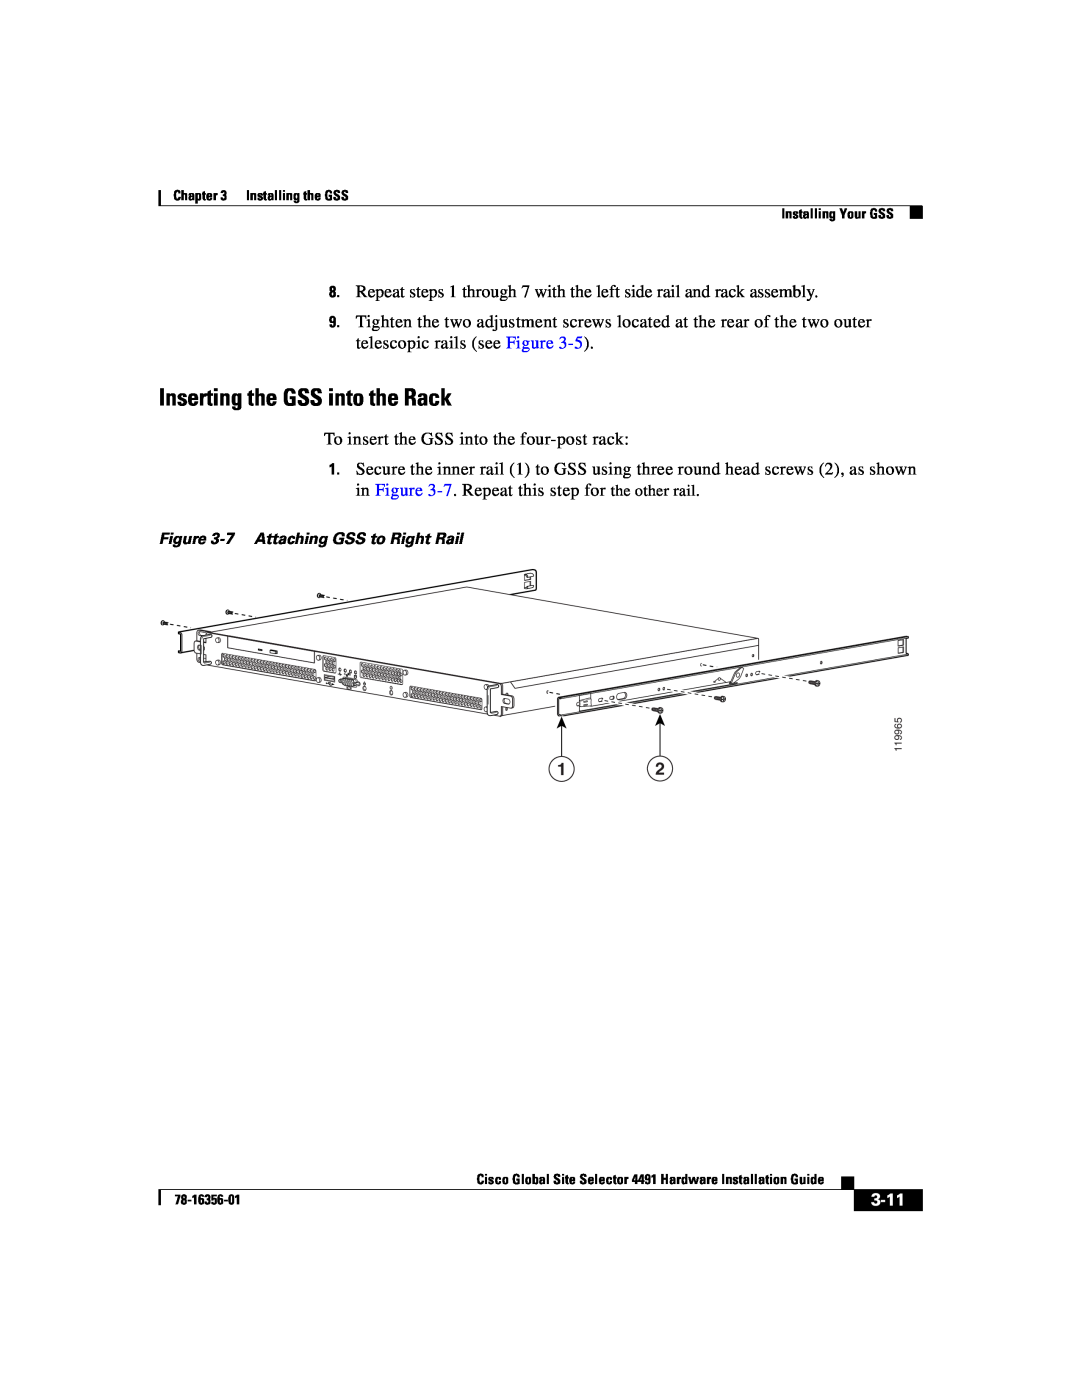 Cisco Systems 78-16356-01 manual Inserting the GSS into the Rack, 3-11 